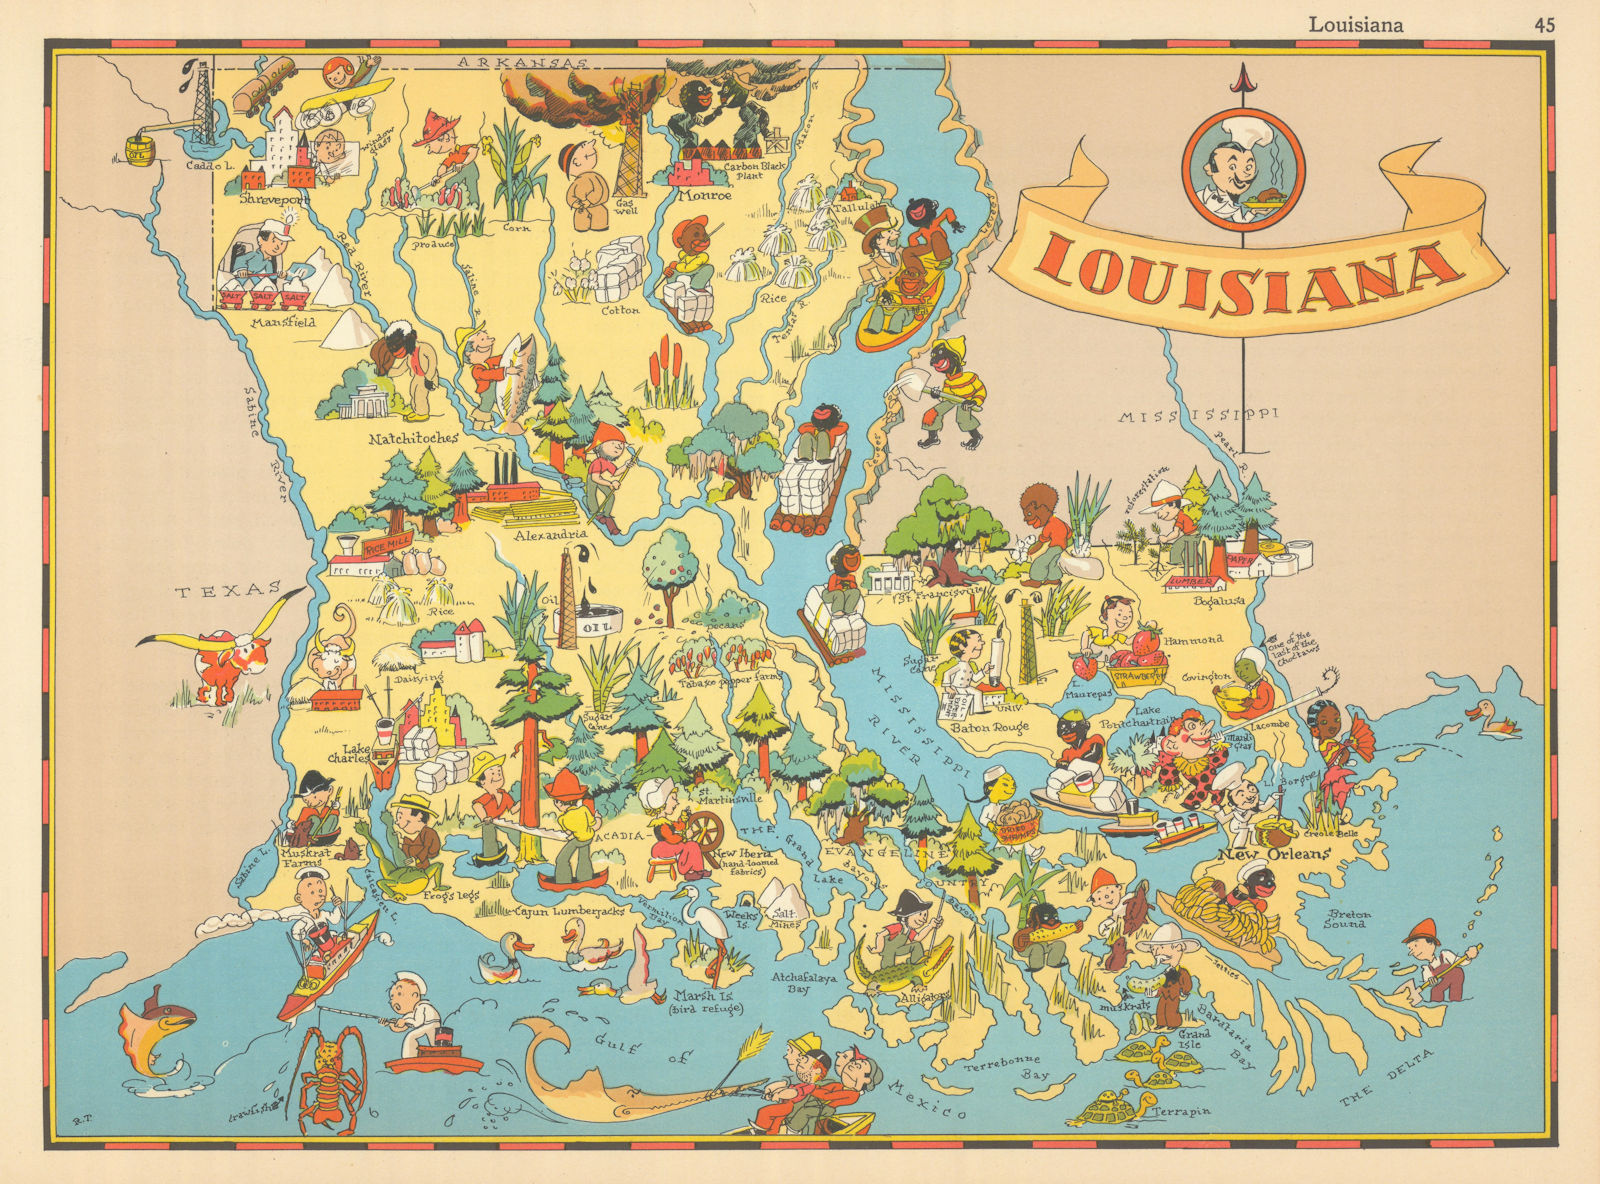 Associate Product Louisiana. Pictorial state map by Ruth Taylor White 1935 old vintage chart